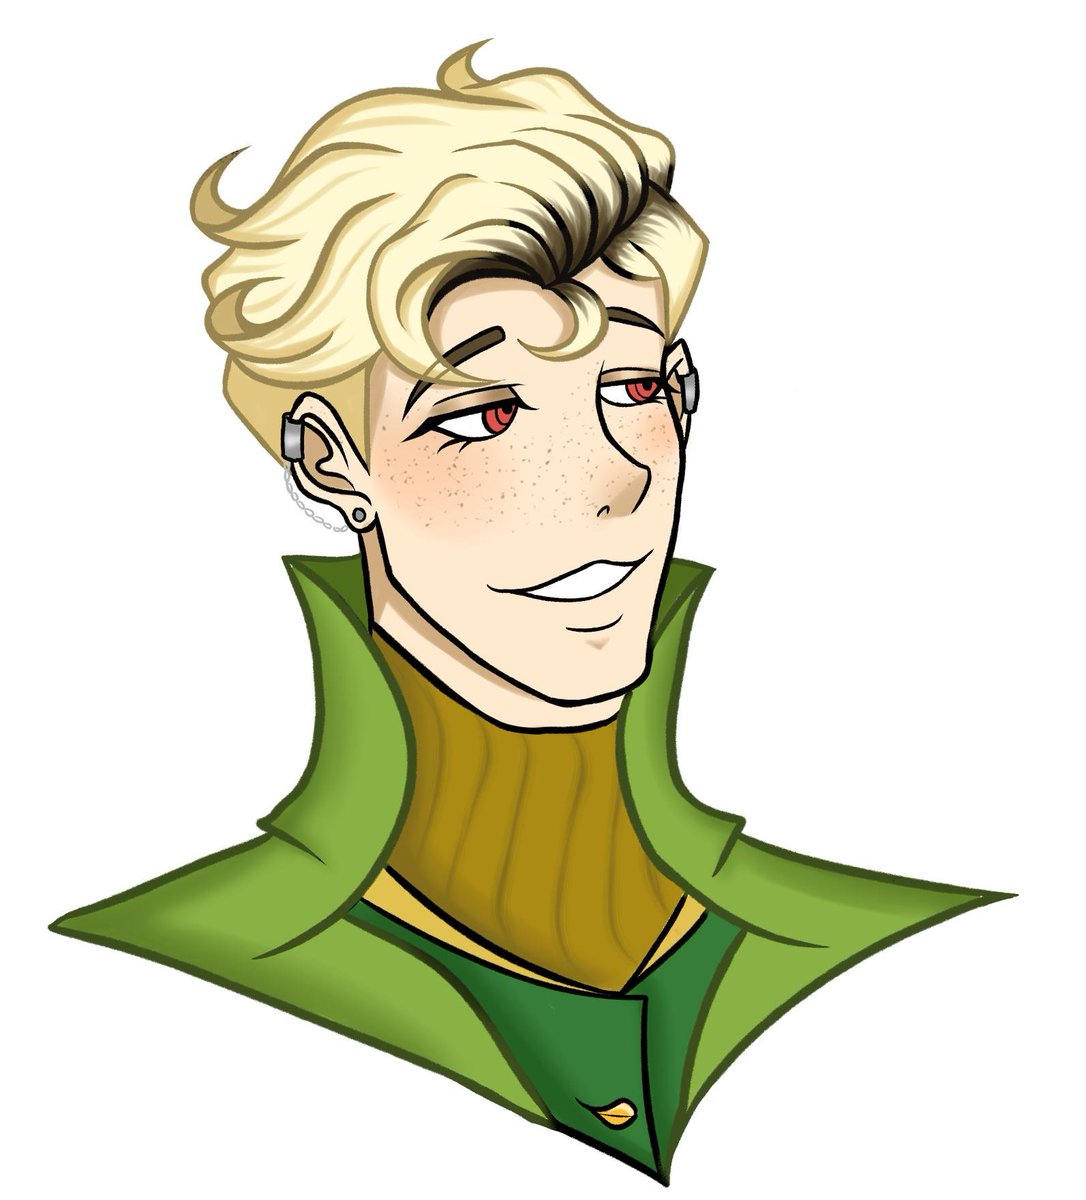 20. florian - leavanny gijinka and master tailor, he loves good fashion and buff men, but also loves to dress stylish women. he is kinda prissy and spoiled but has a good heart